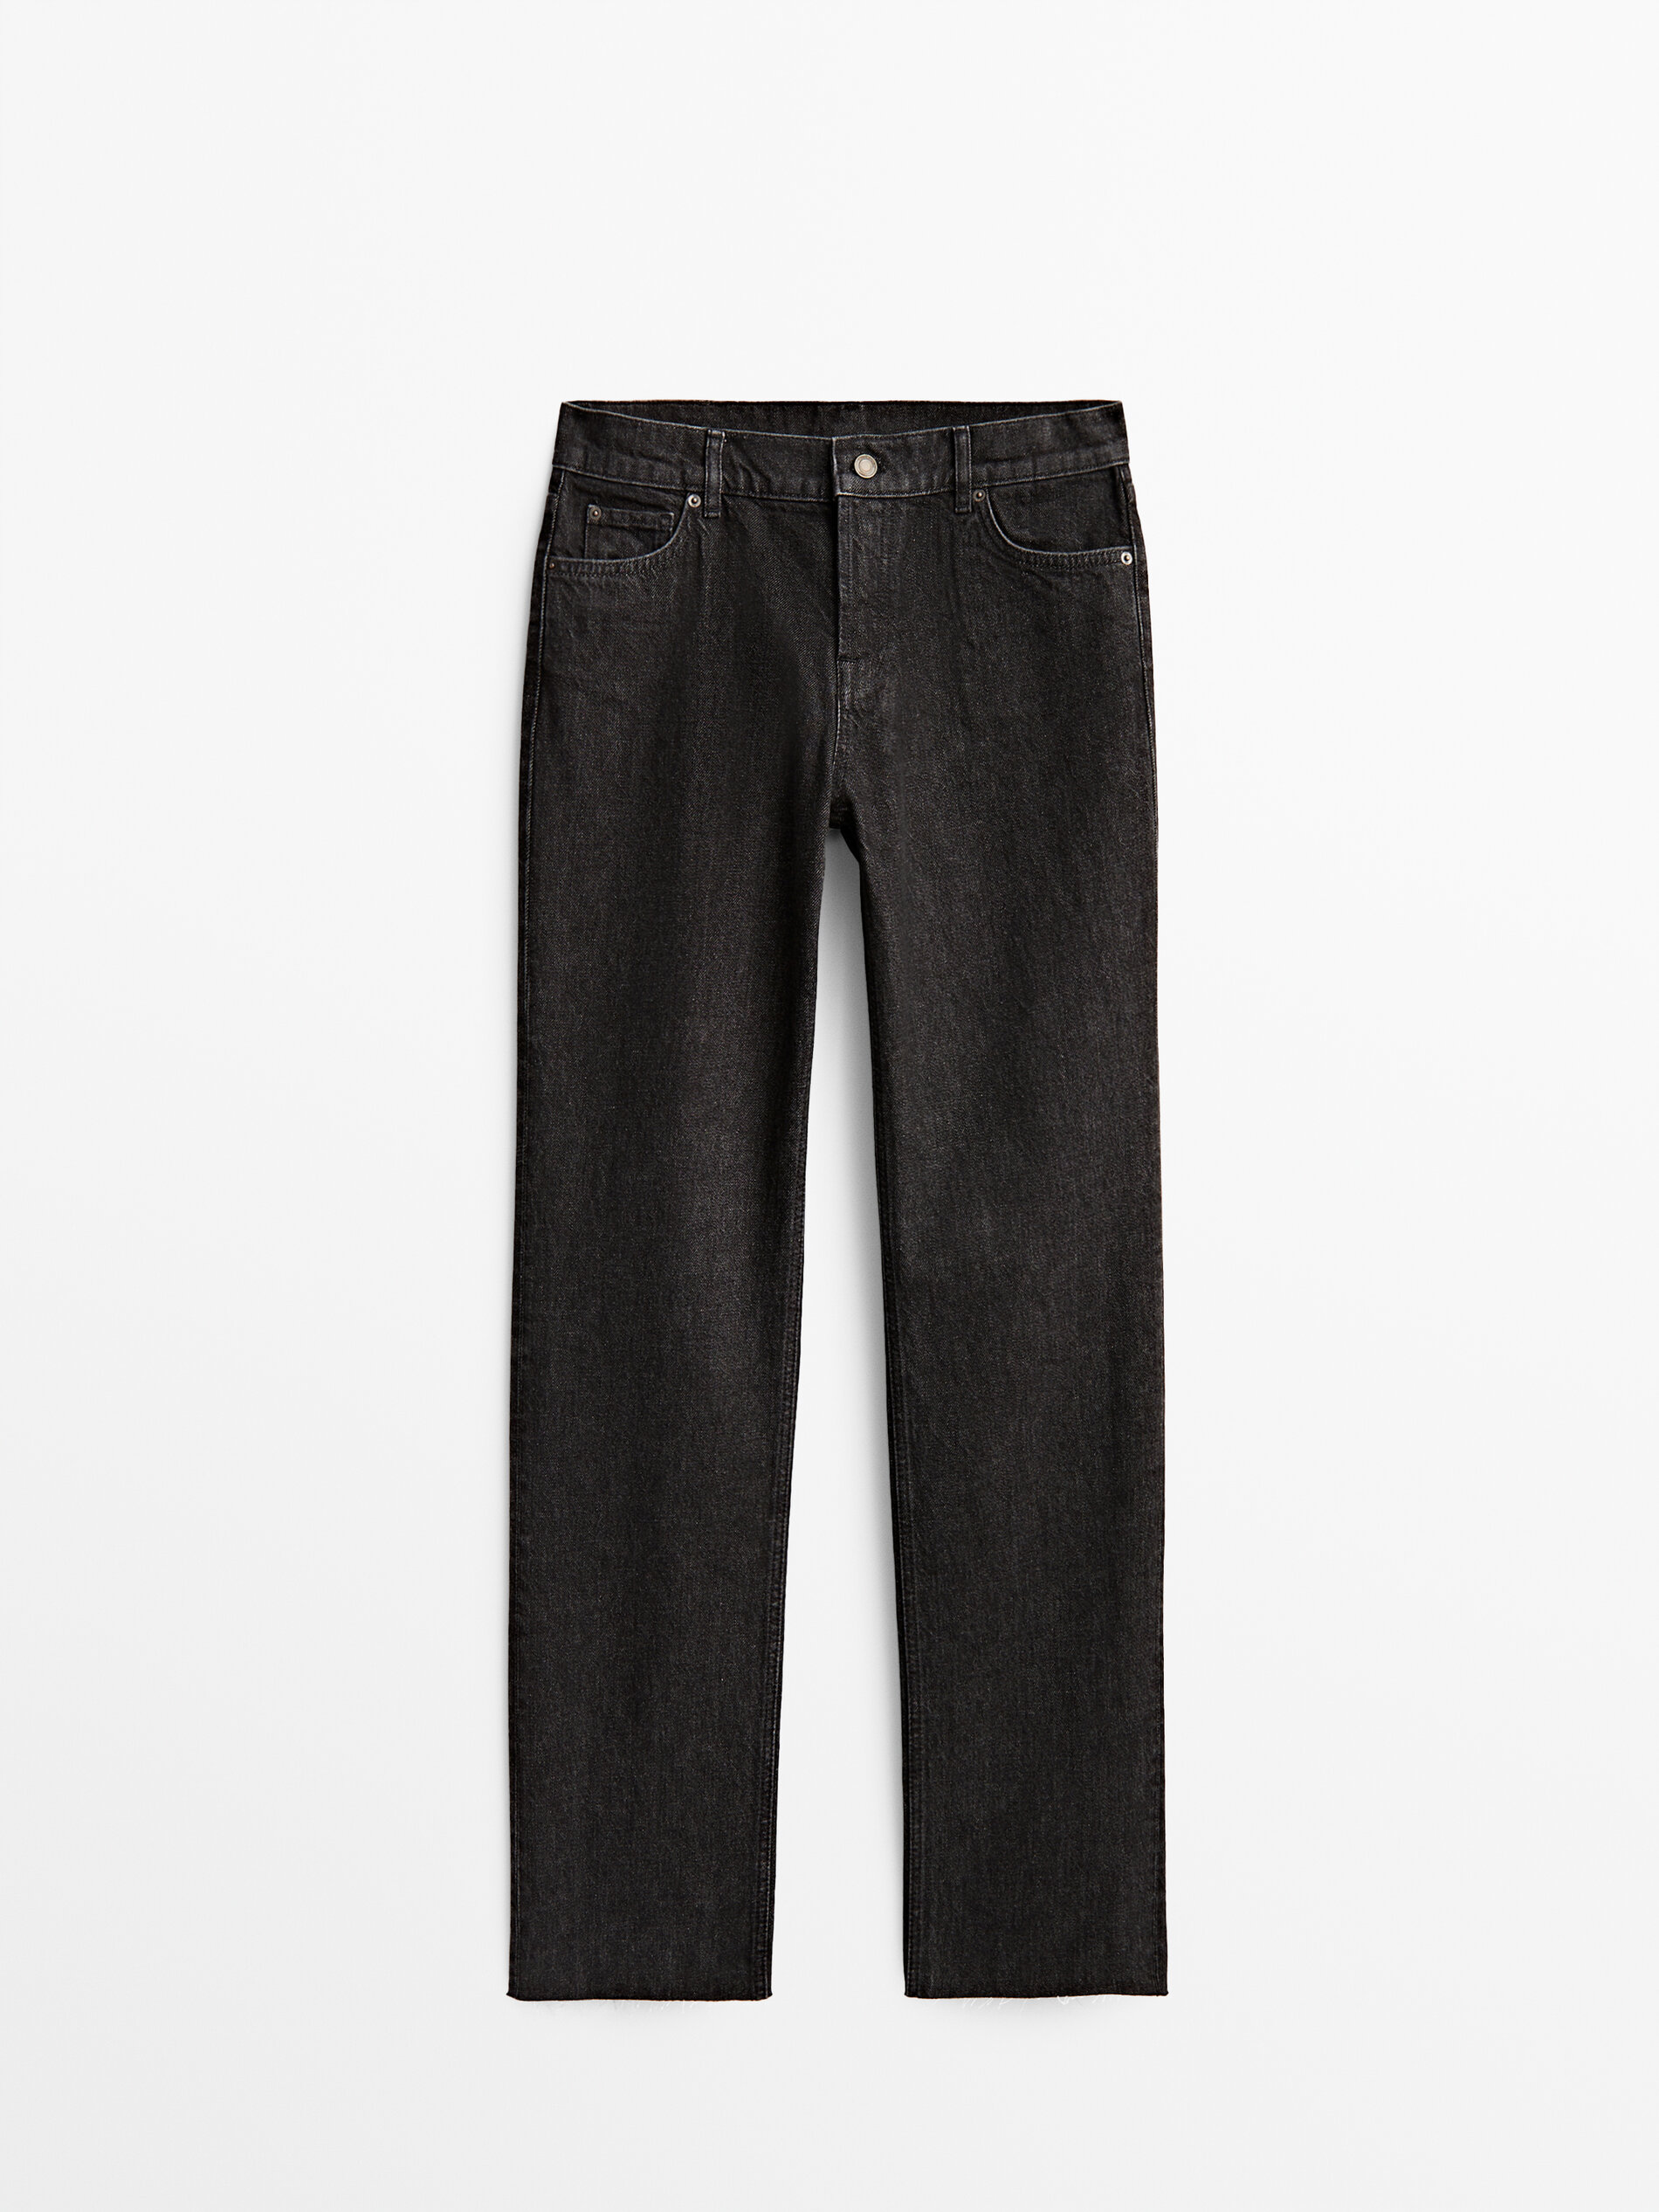 Jeans for Women - Massimo Dutti United States of America